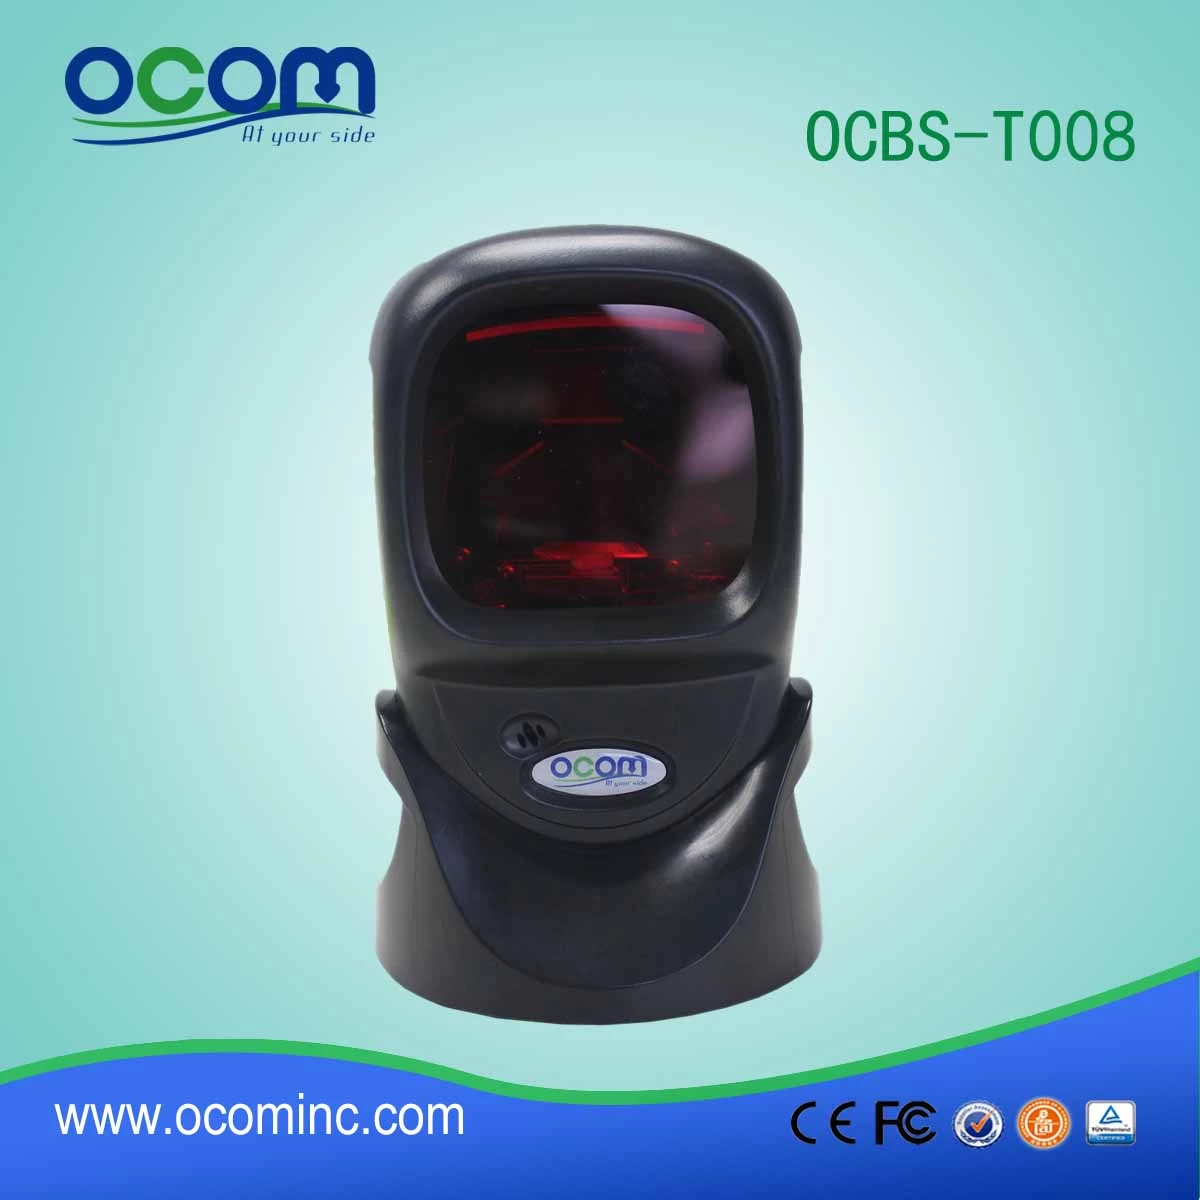 Omni directional desktop usb barcode scanner with long distance-OCBS-T008